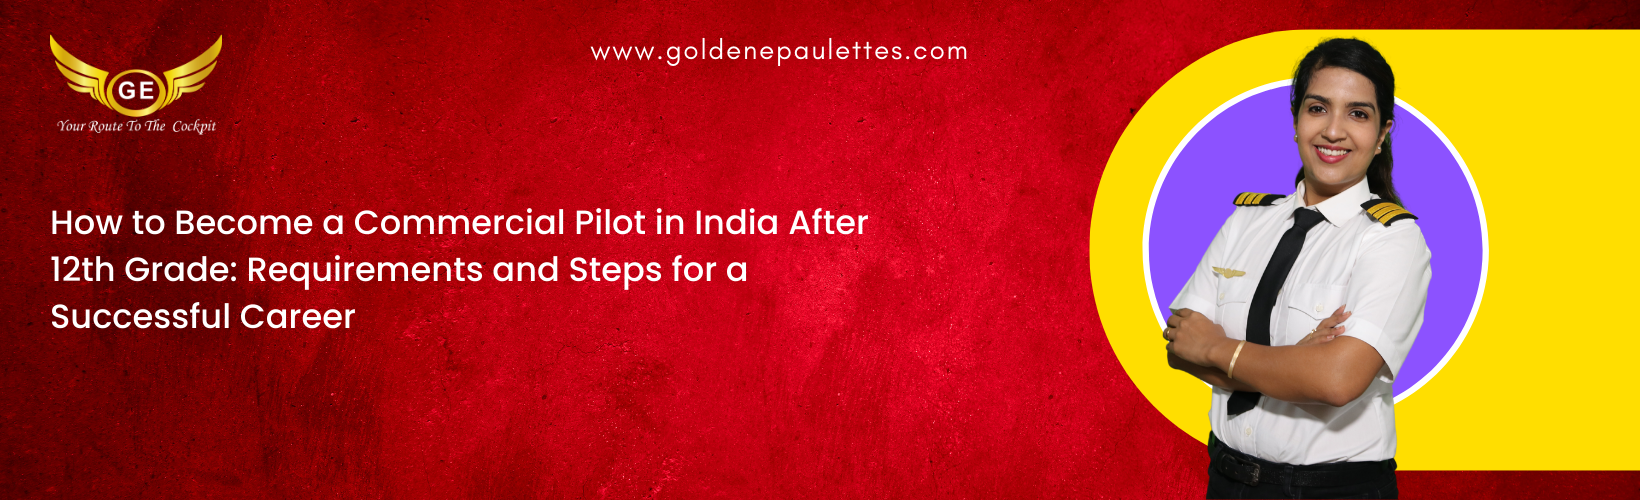 How to Start Your Career as a Commercial Pilot After 12th in India